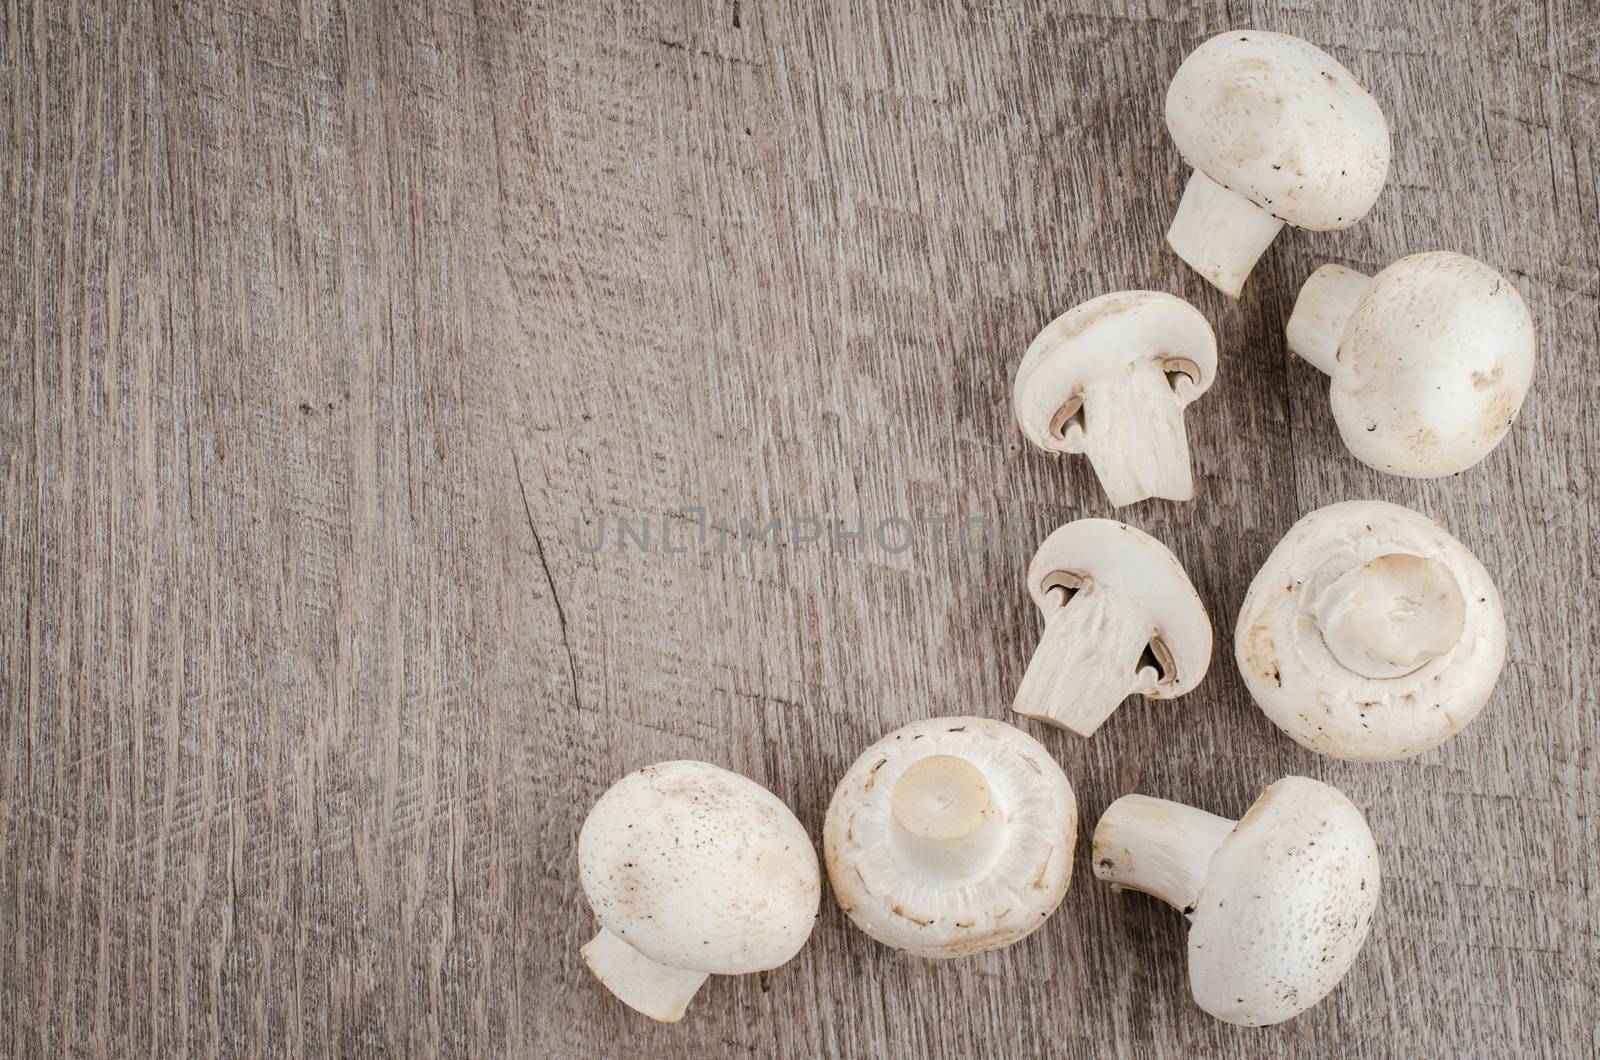 Fresh mushrooms on a wooden background.